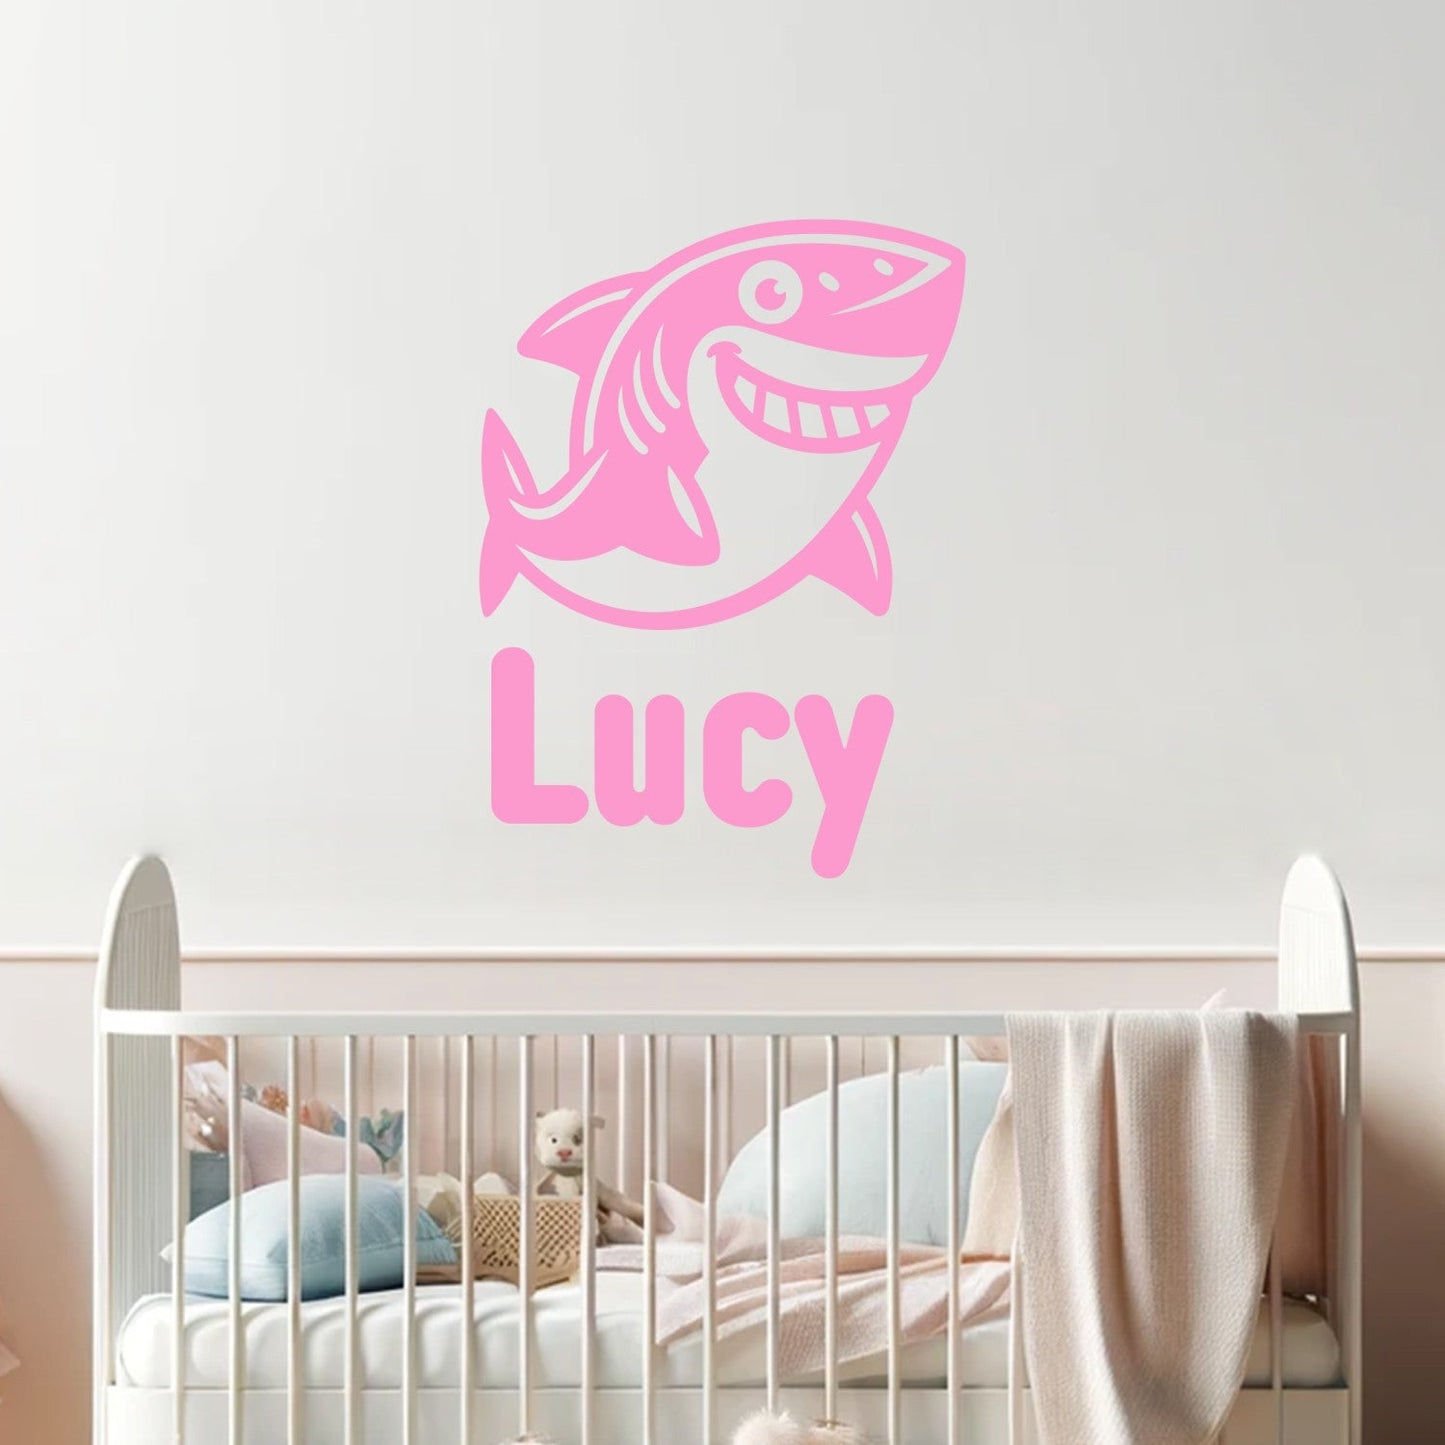 Nursery Wall Decal with Animal Stickers - Nursery Decals for Kids Room Decor - Personalized Name Decal - Cusrtom Shark  Stickers for Wall with Name